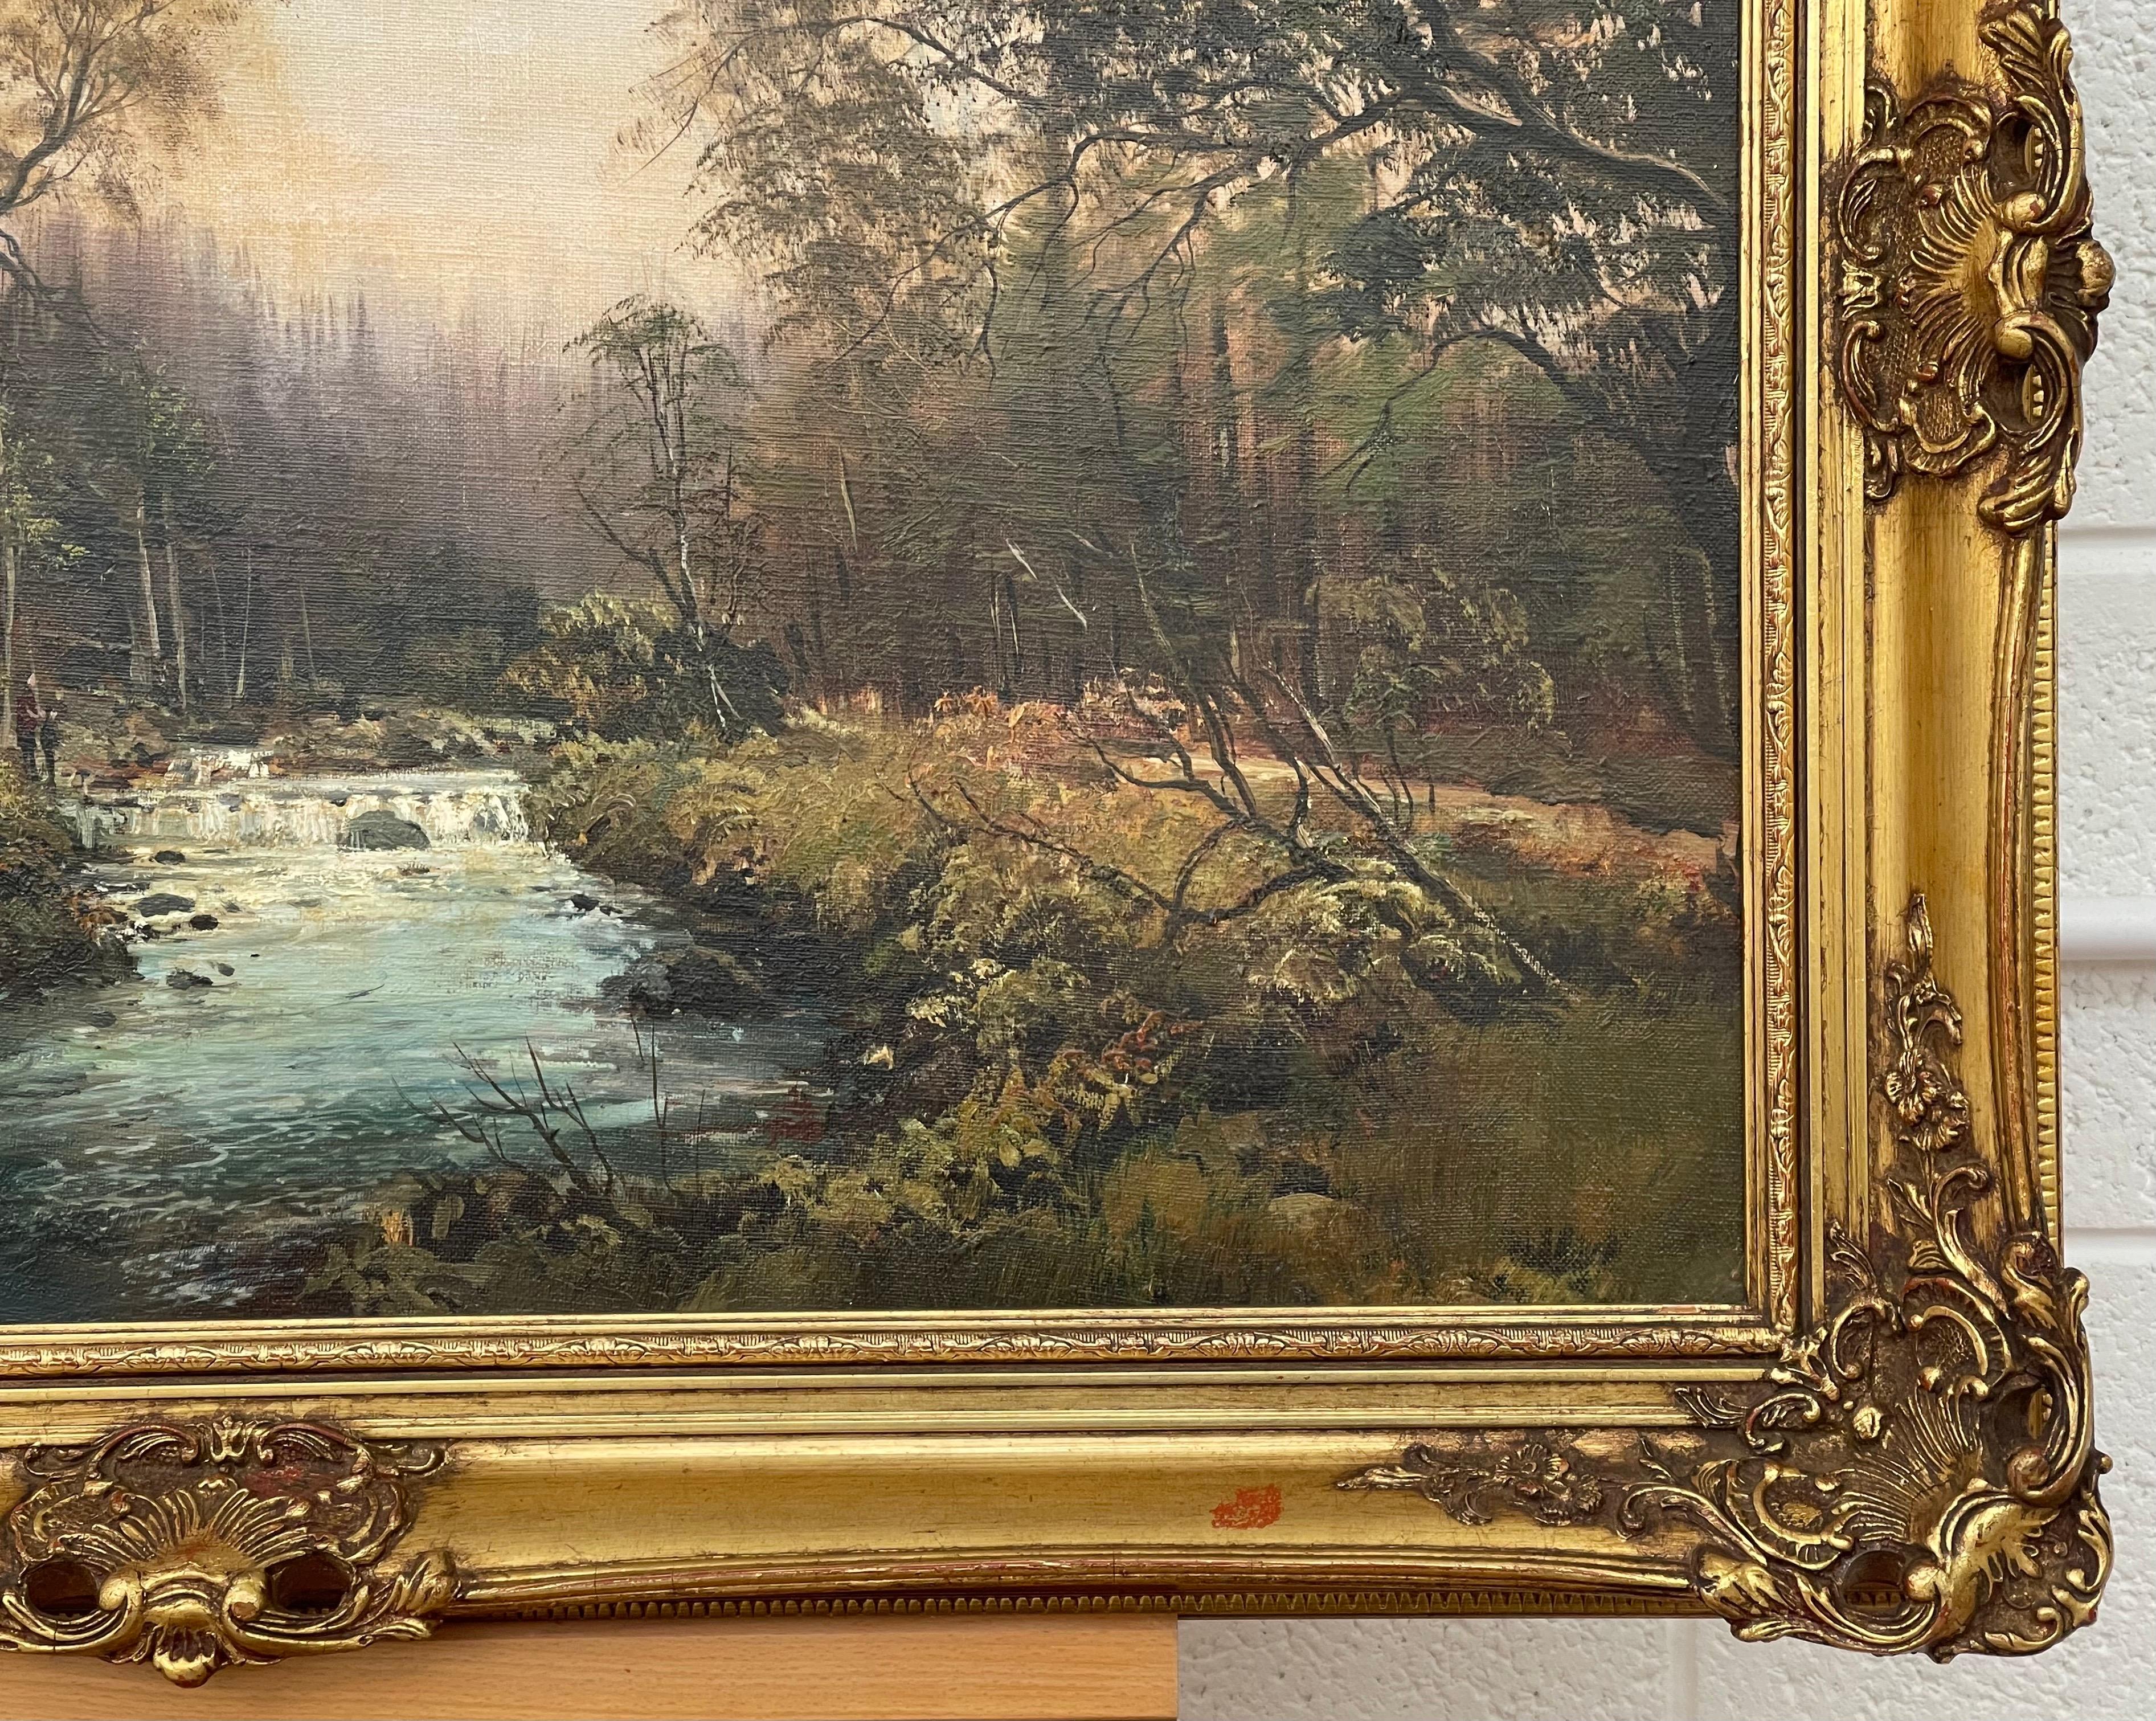 Original Post-War Oil Painting of Tollymore Forest in Northern Ireland by 20th Century Modern Artist, Denis Thornton (1937-1999)

Art measures 30 x 20 inches 
Frame measures 36 x 26 inches (approx.) 

Denis Thornton was a very talented Post-War